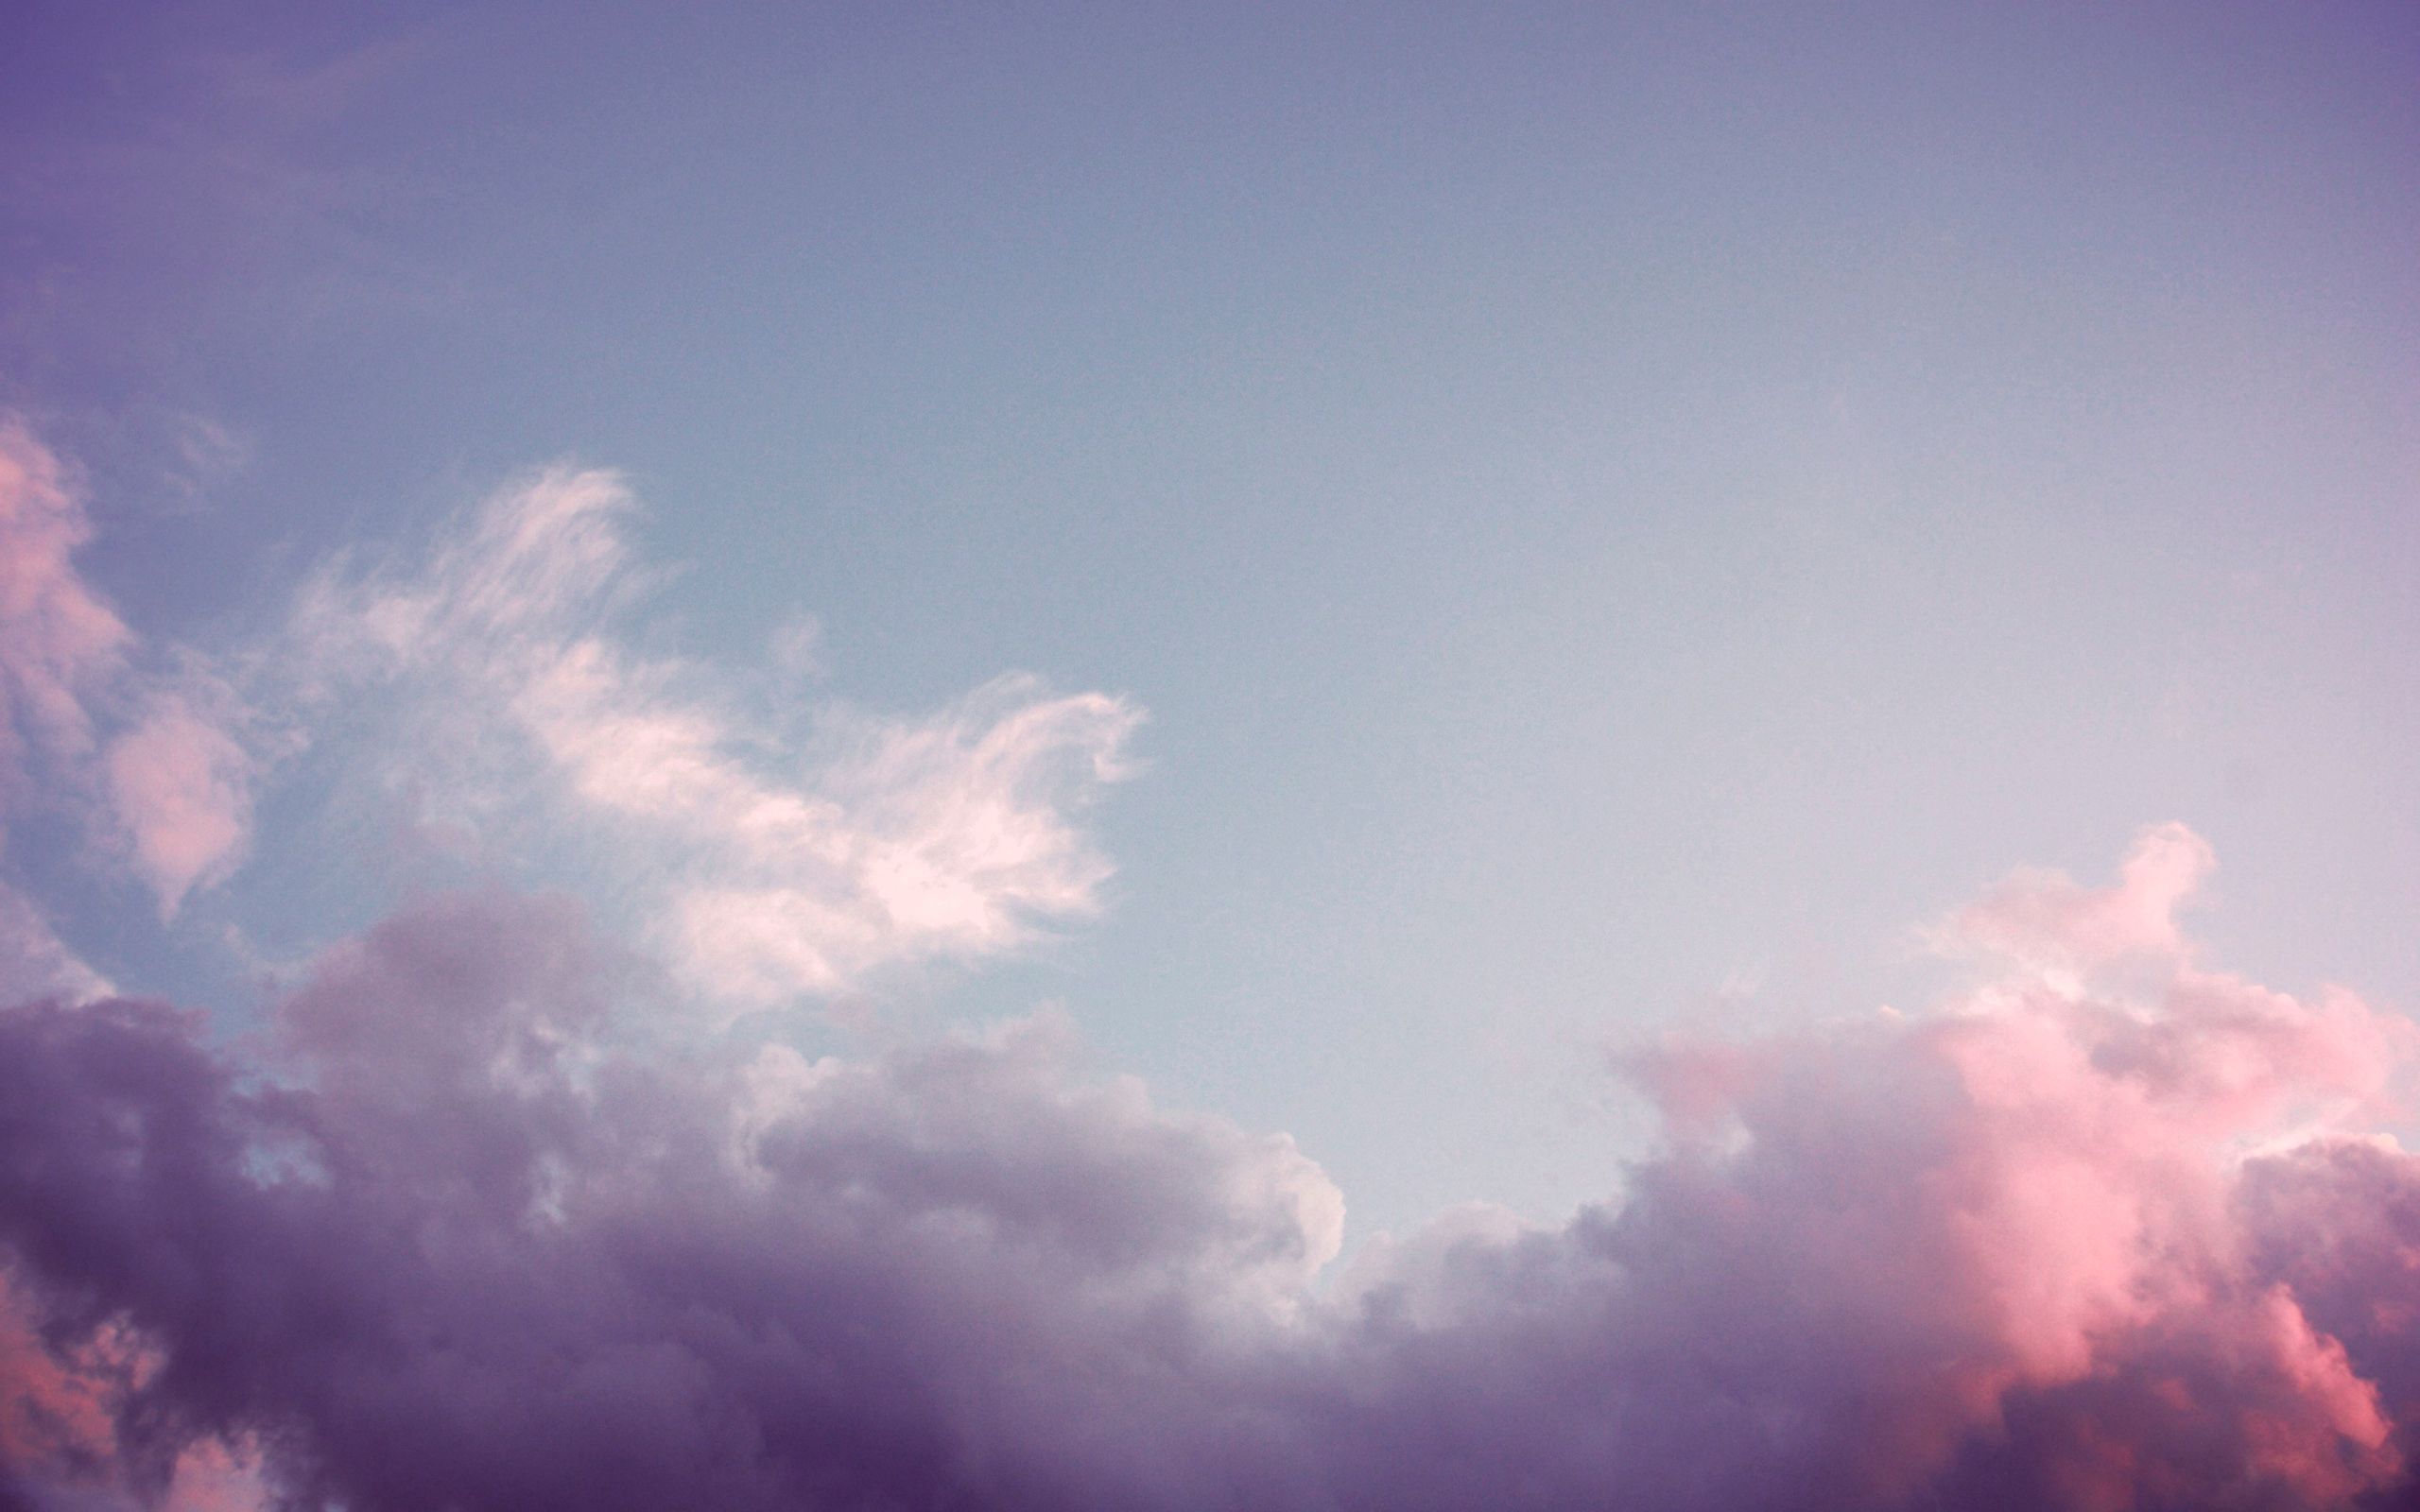 Download wallpaper 2560x1600 sky, clouds, pink HD background